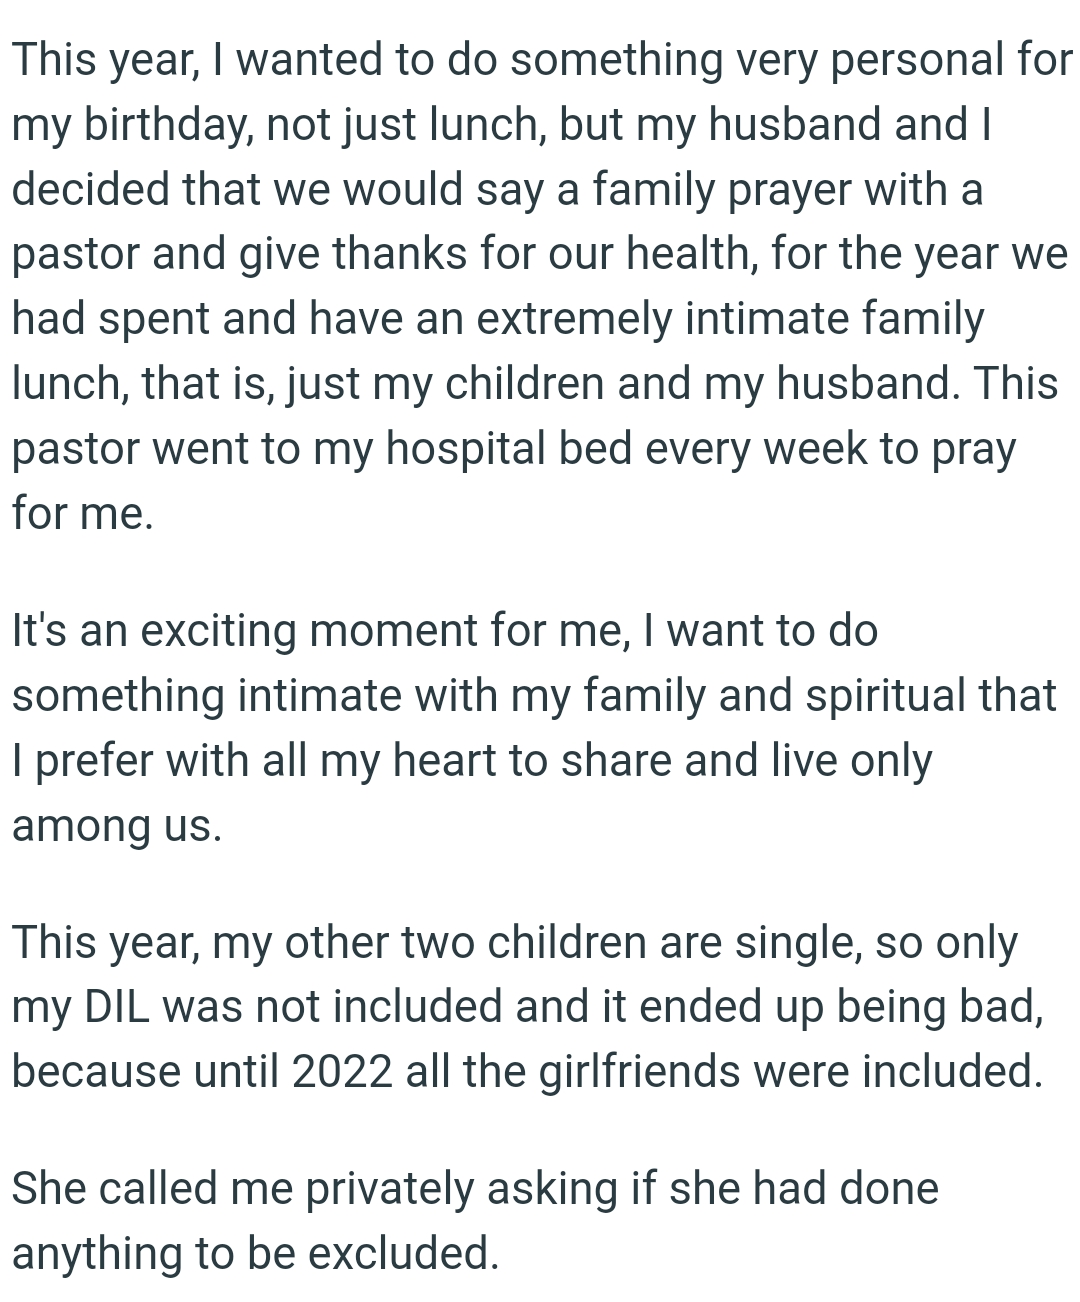 The OP wanted to do something intimate with her family and spiritual